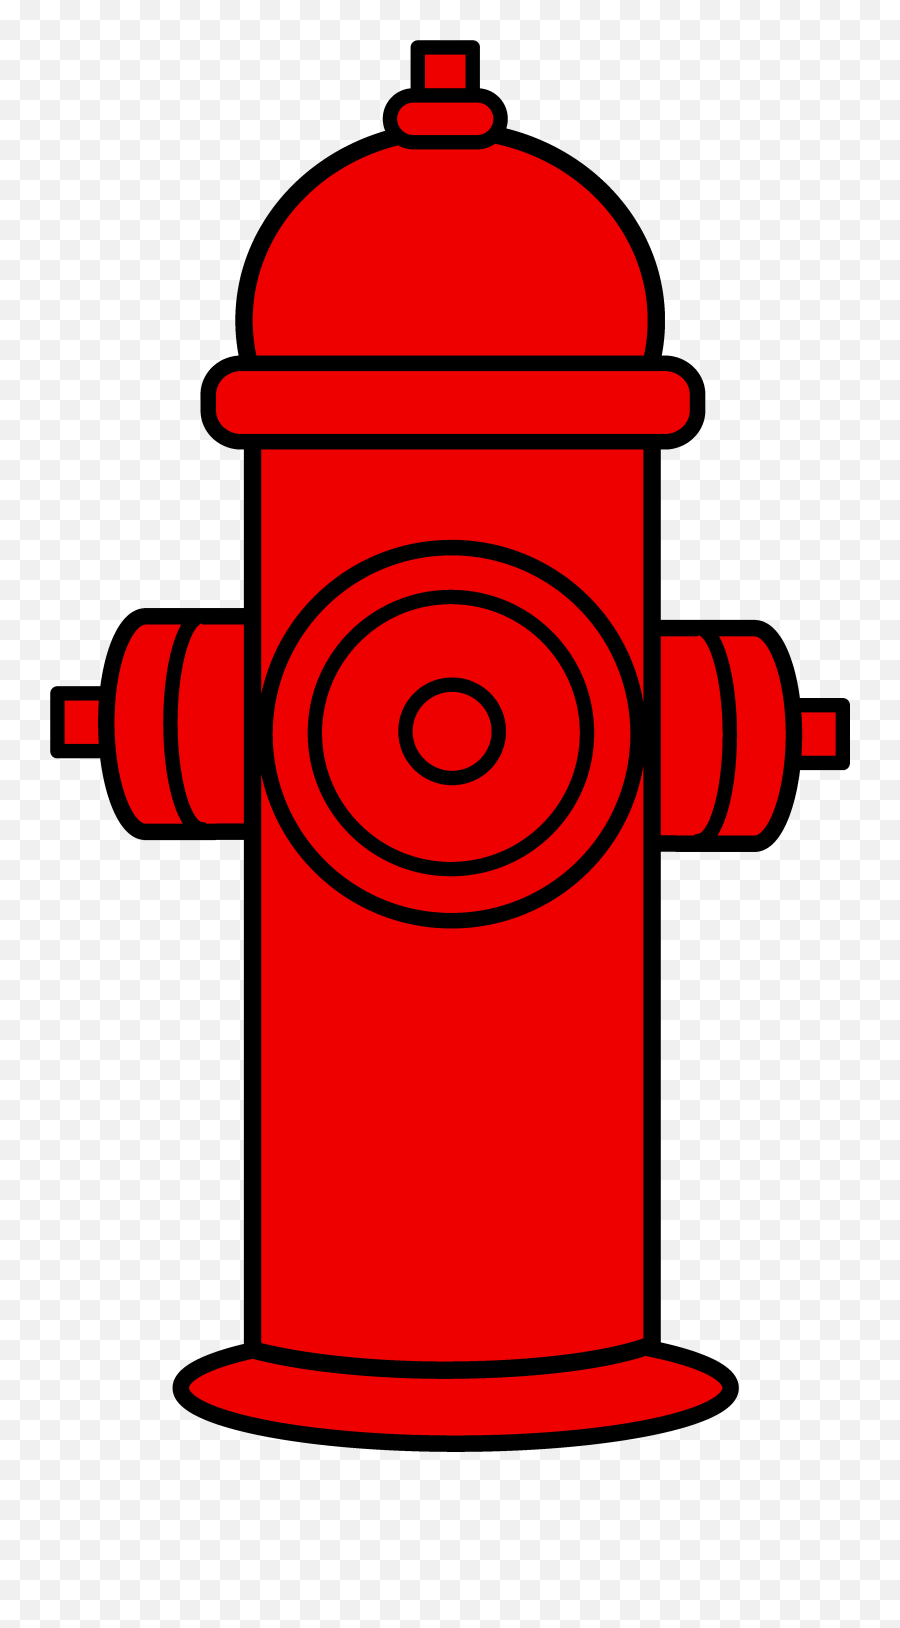 Fire Extinguisher Drawing - Clipart Best Fire Hydrant Clipart Emoji,Fire Extinguisher Emoji